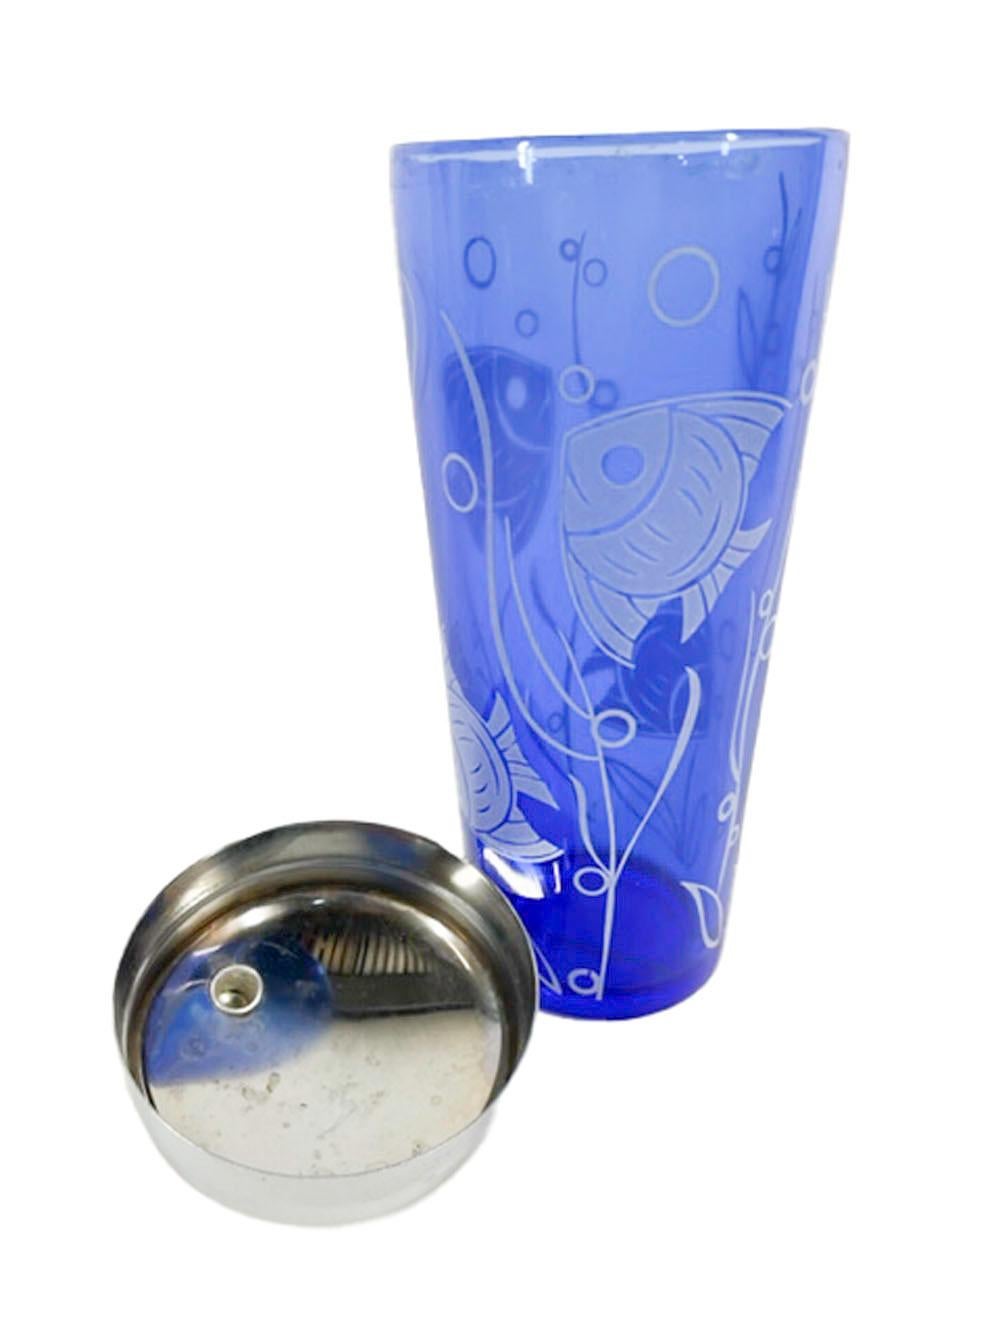 20th Century Art Deco, Hazel-Atlas Cobalt Cocktail Shaker and Glasses with Tropical Fish